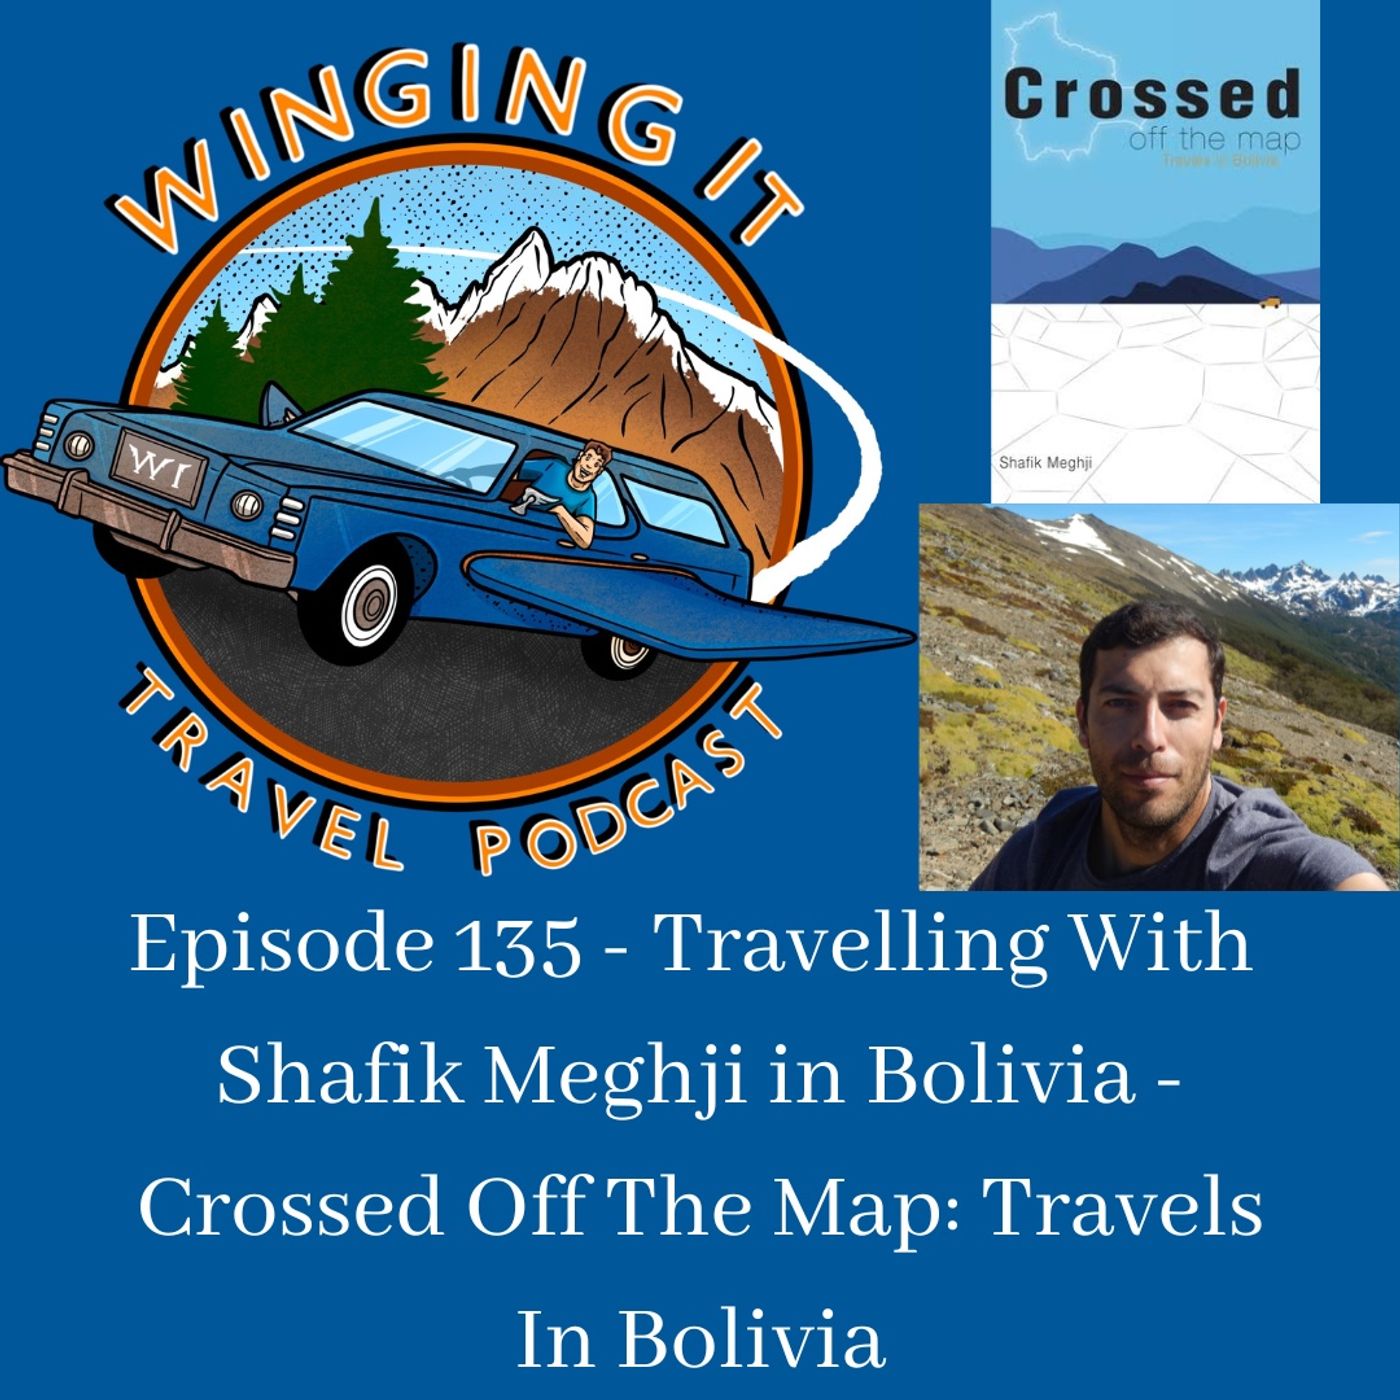 Episode 135 - Travelling With Shafik Meghji in Bolivia - Crossed Off The Map: Travels In Bolivia